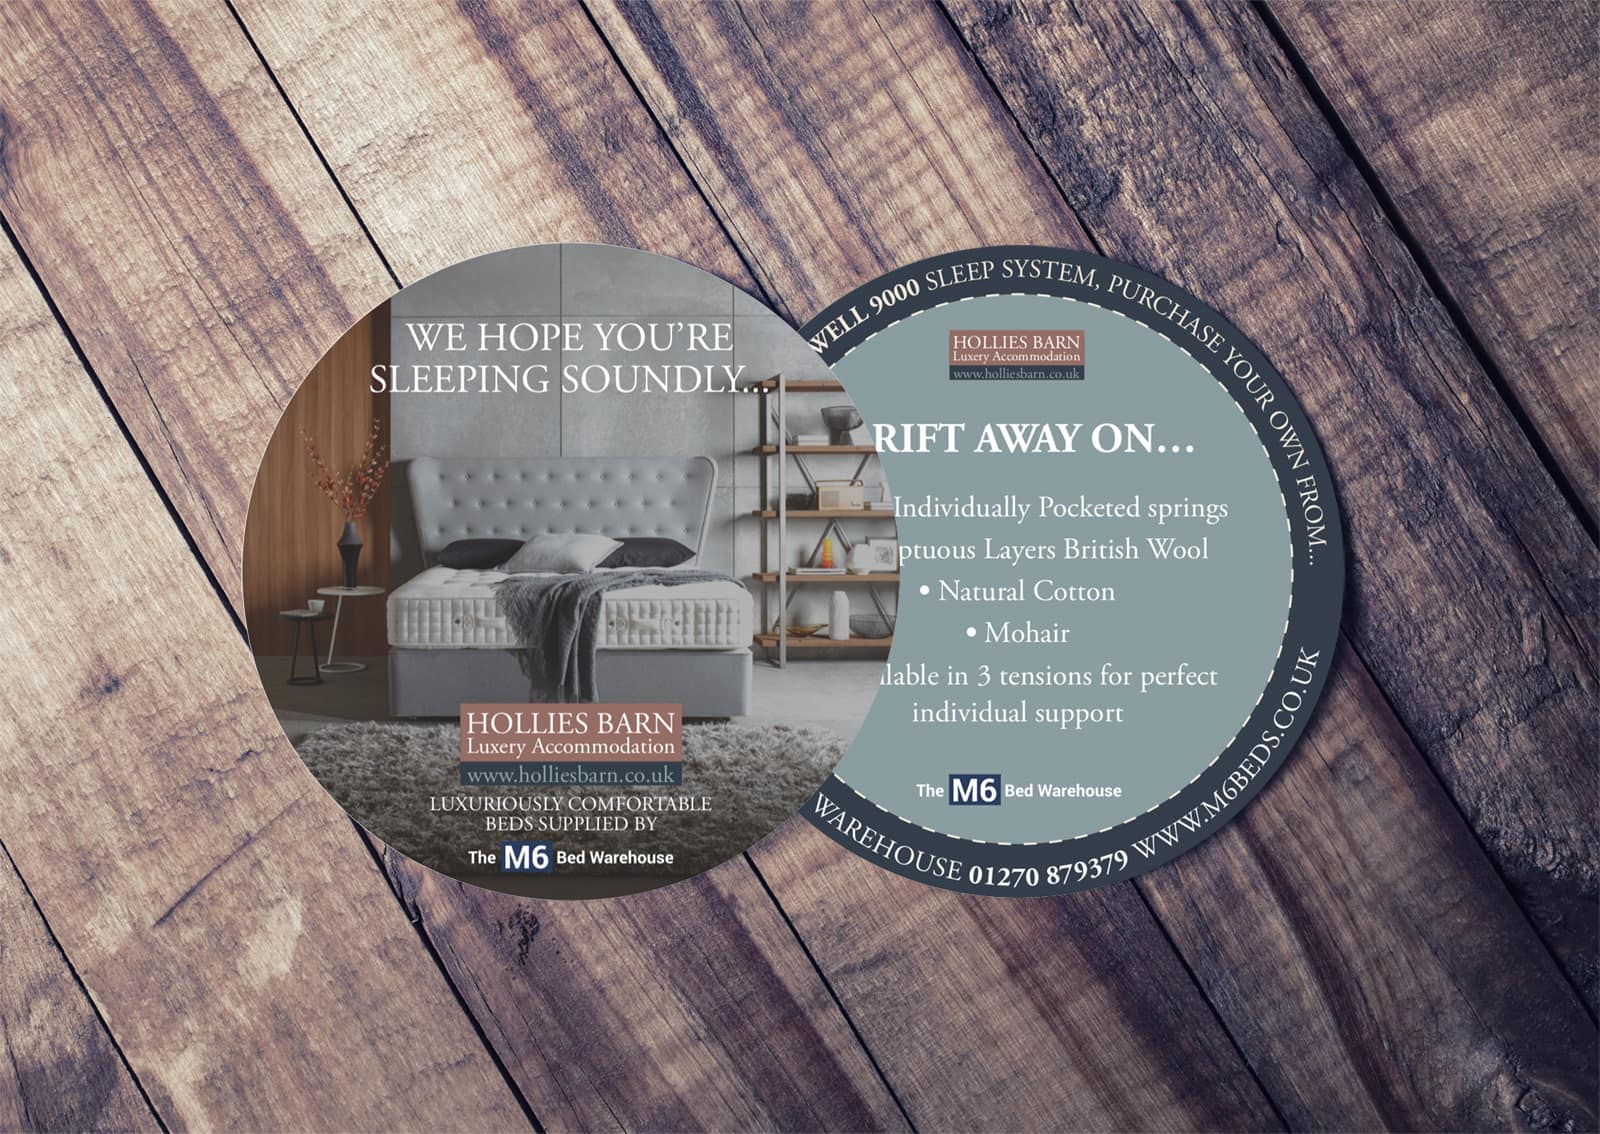 The M6 Bed Warehouse | Promotional Material, Printed Beer Mats, Marketing